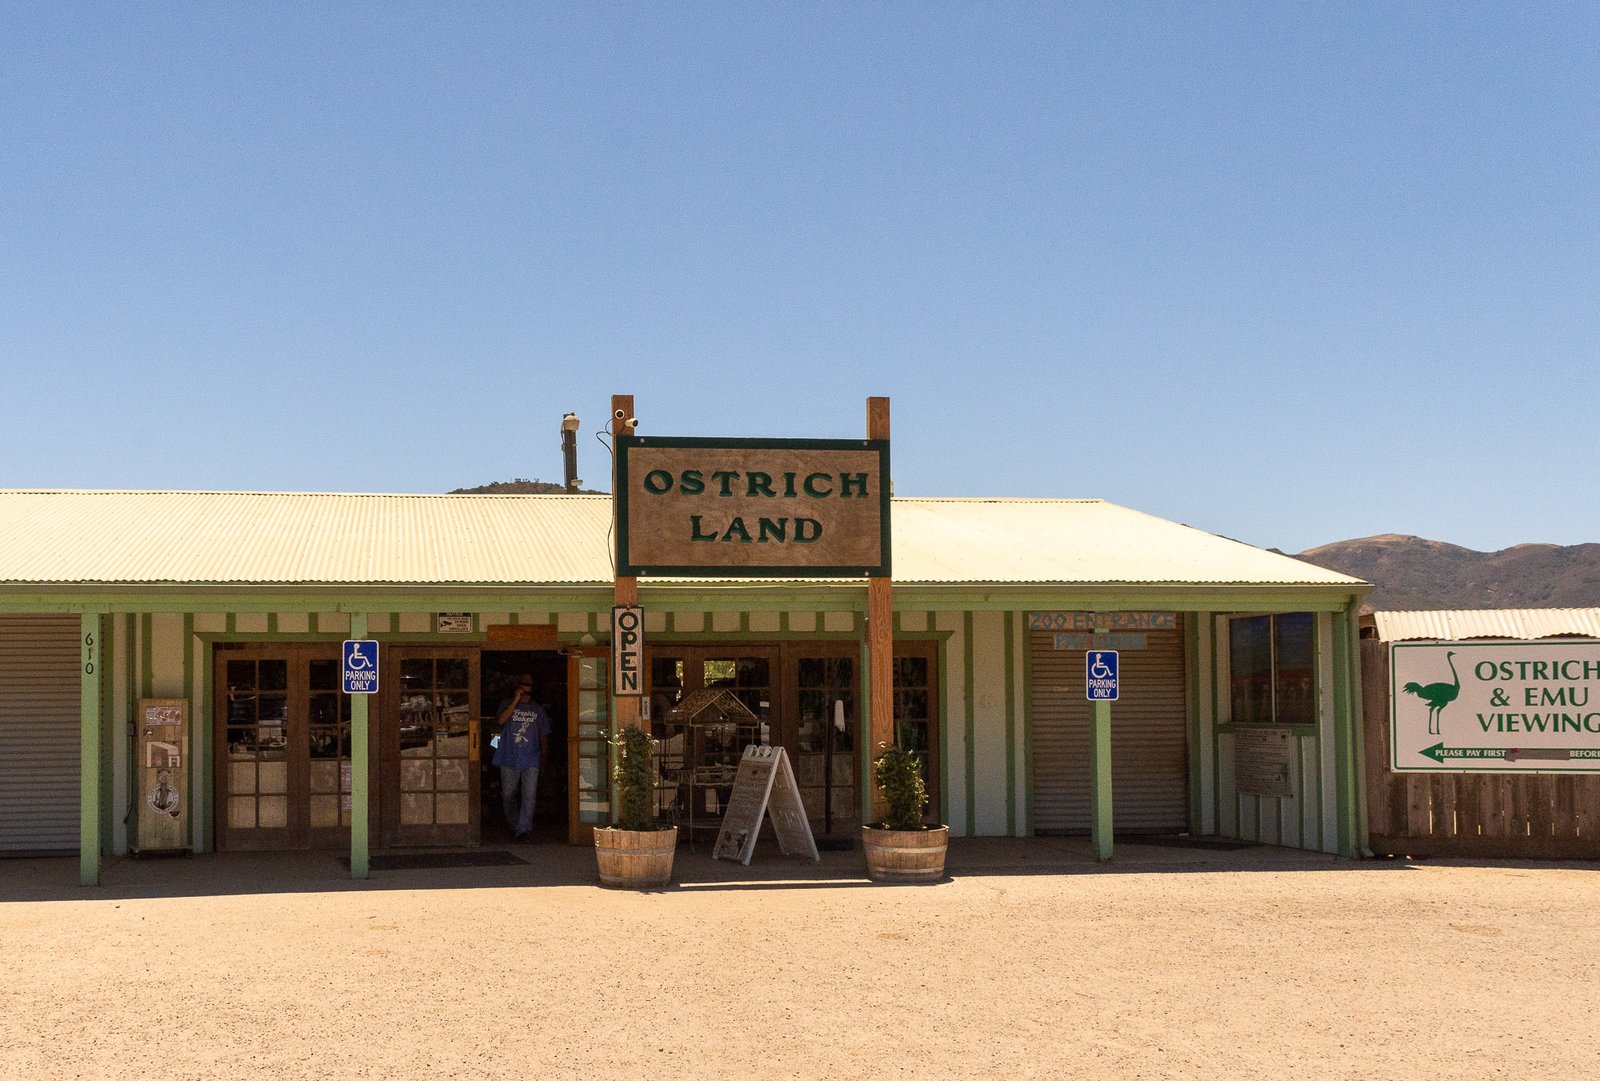 Ostrichland offices and gift store